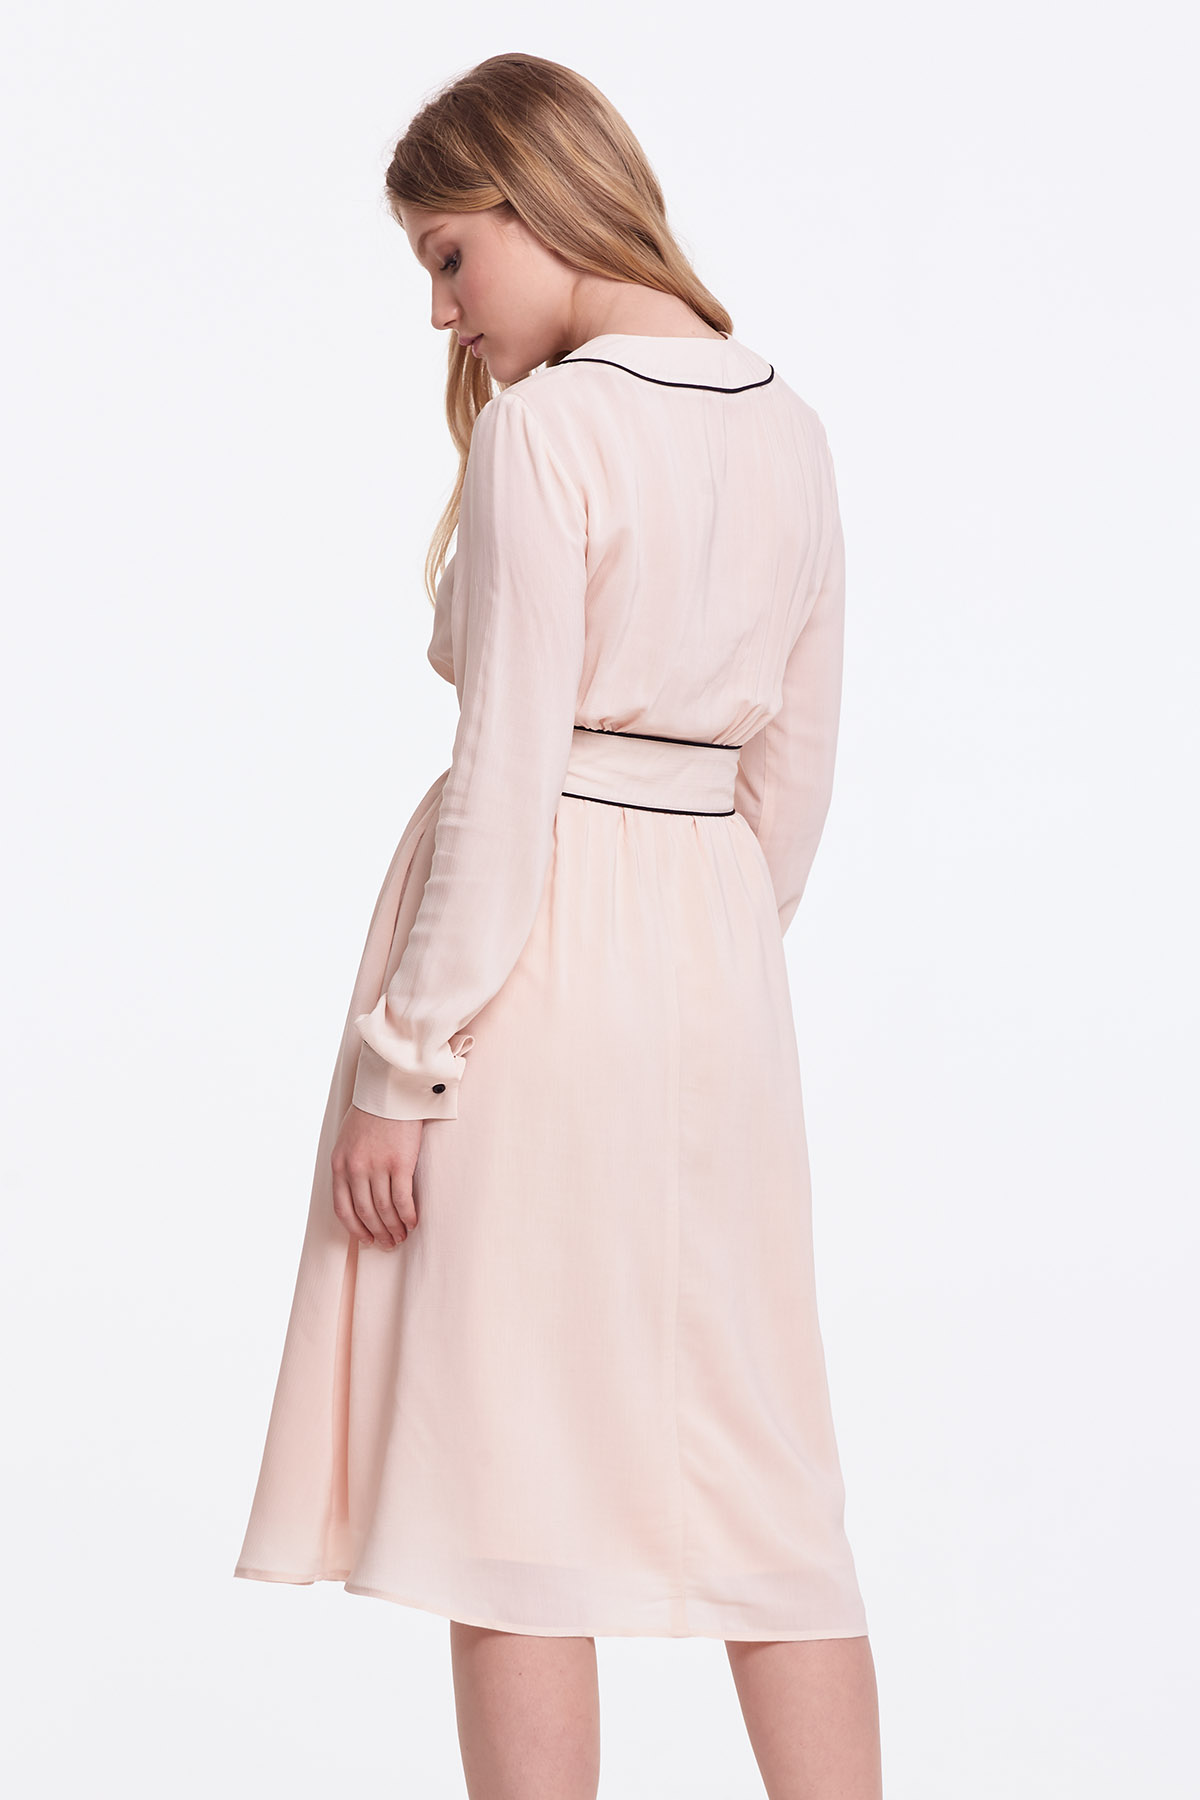 V-neck beige dress with a piping, photo 4